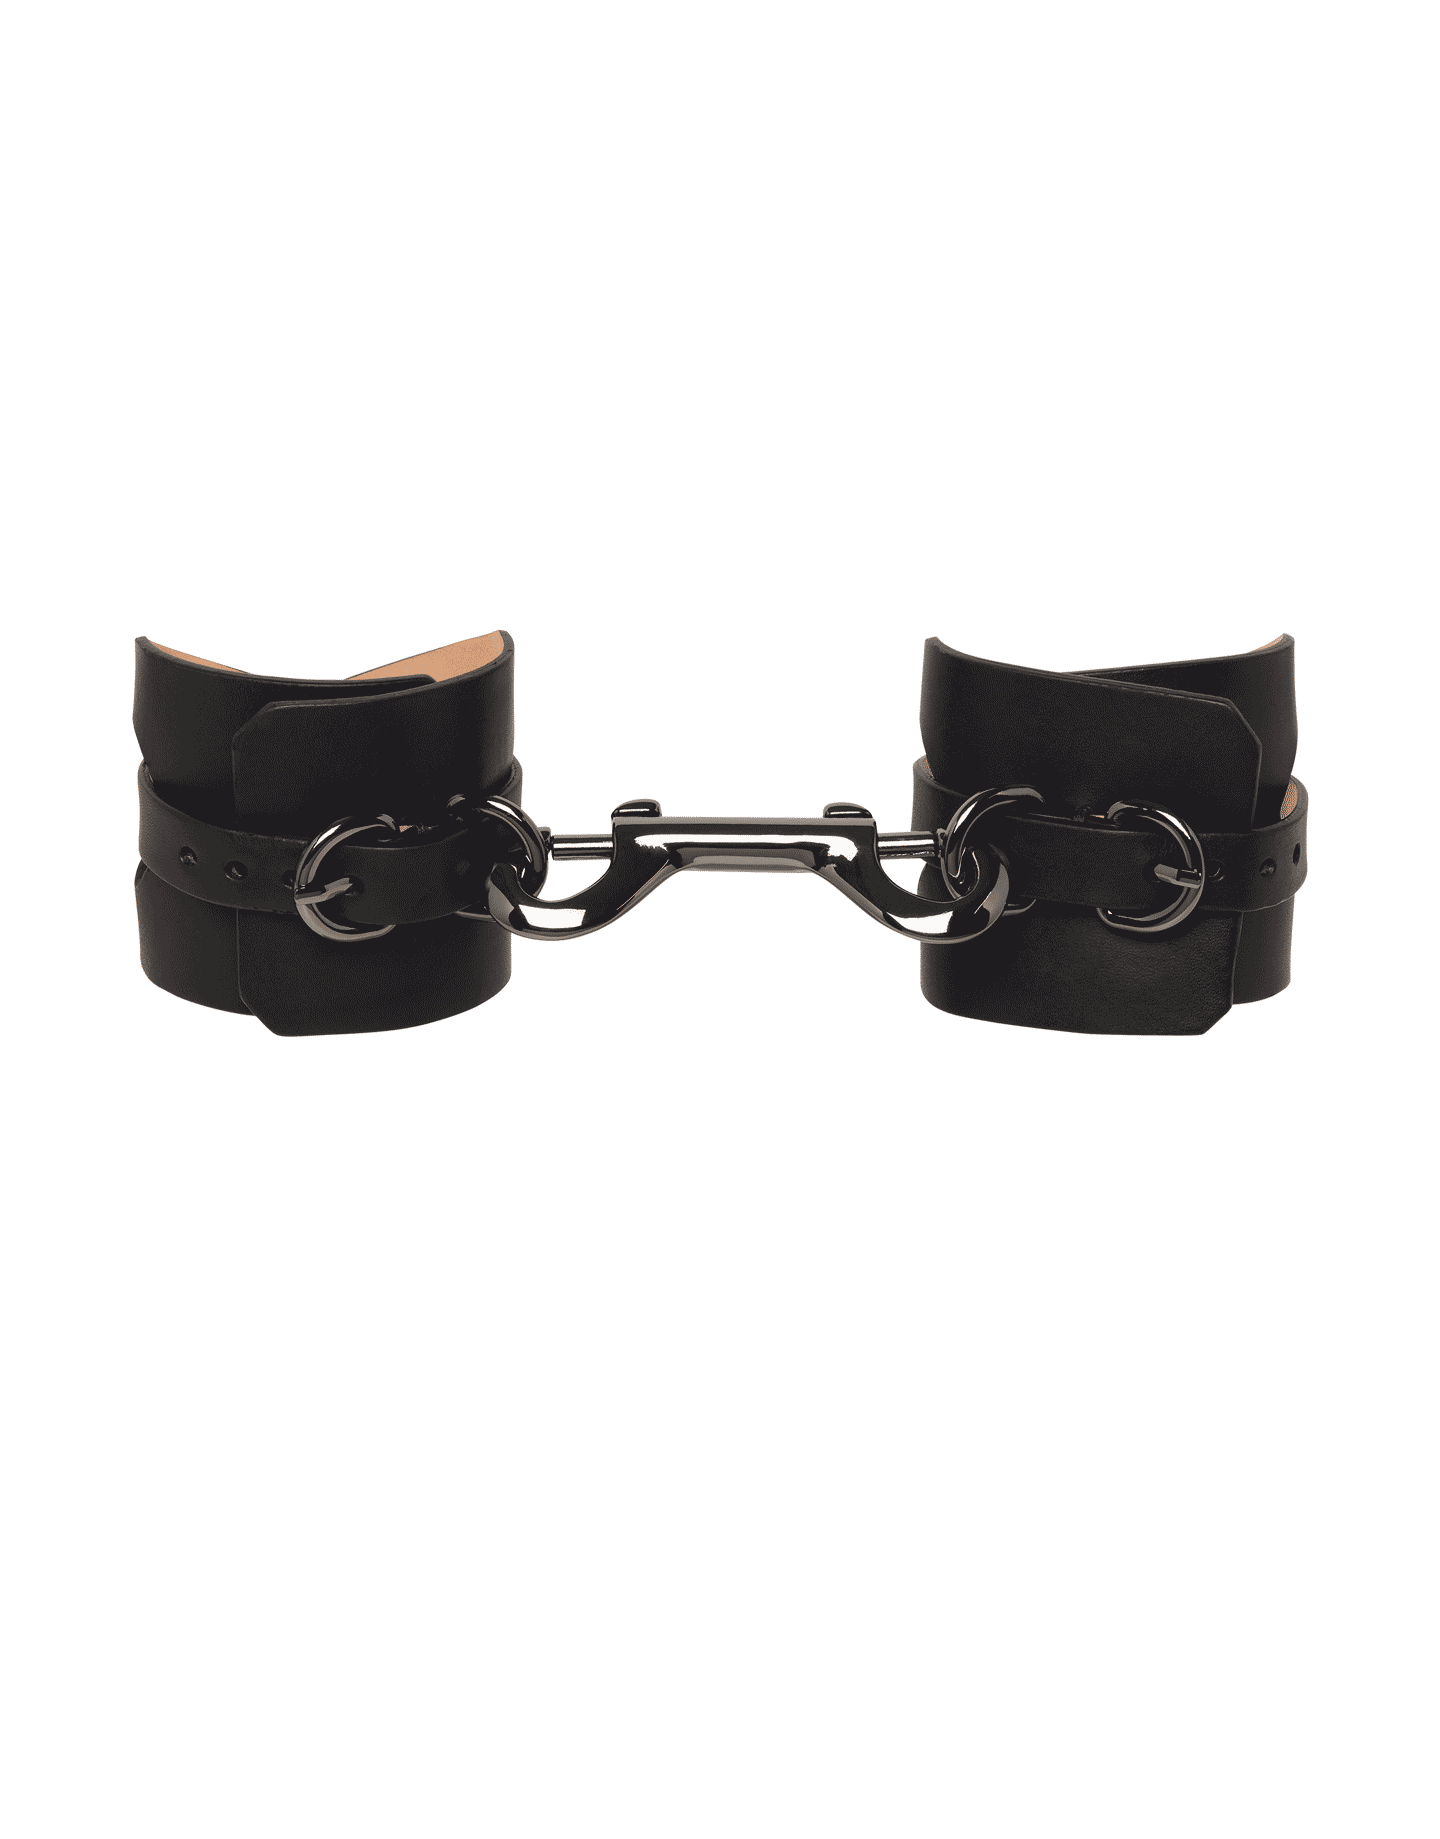 Agent Provocateur Veronika Leather Double Cuff www.wilshirelabs.com